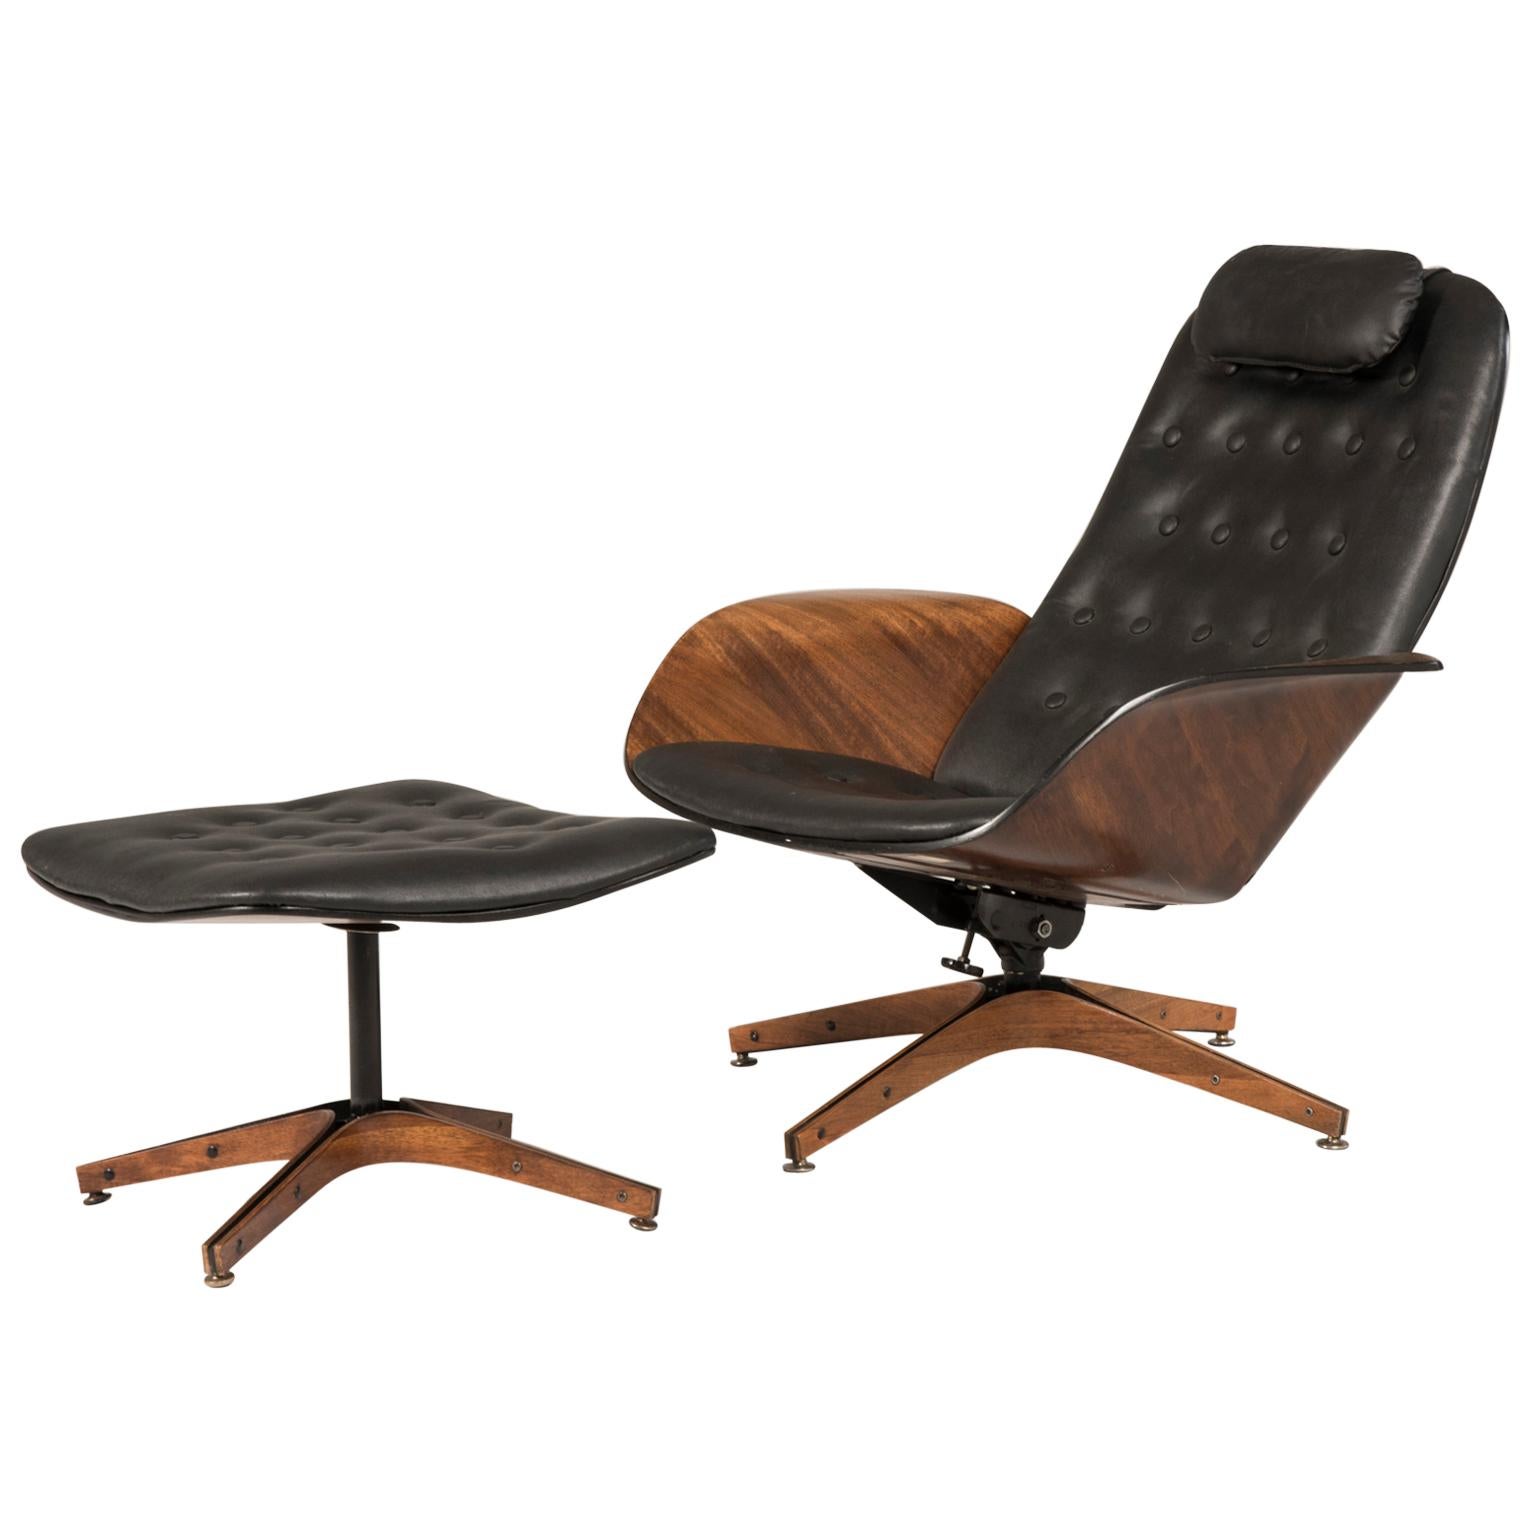 1964 Mr. Chair II by George Mulhauser for Plycraft and Ottoman